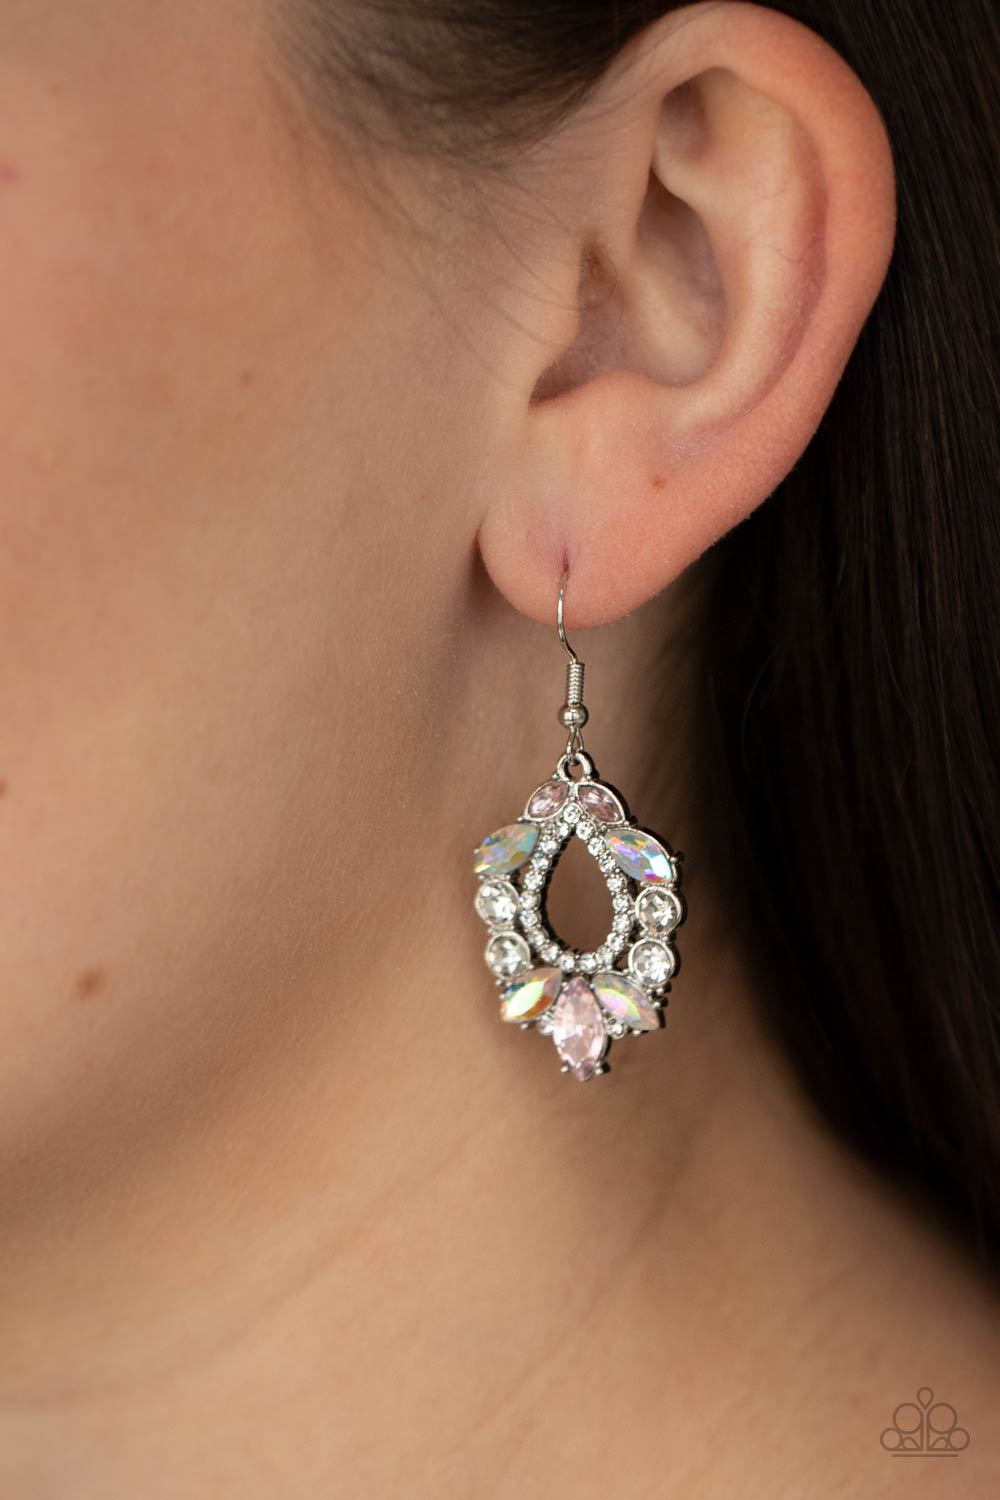 New Age Noble Multi Earring - Paparazzi Accessories  Featuring regal marquise and classic round cuts, a glittery collection of pink, white, and iridescent rhinestones coalesce into a jaw-dropping teardrop frame. Earring attaches to a standard fishhook fitting.  All Paparazzi Accessories are lead free and nickel free!  Sold as one pair of earrings.